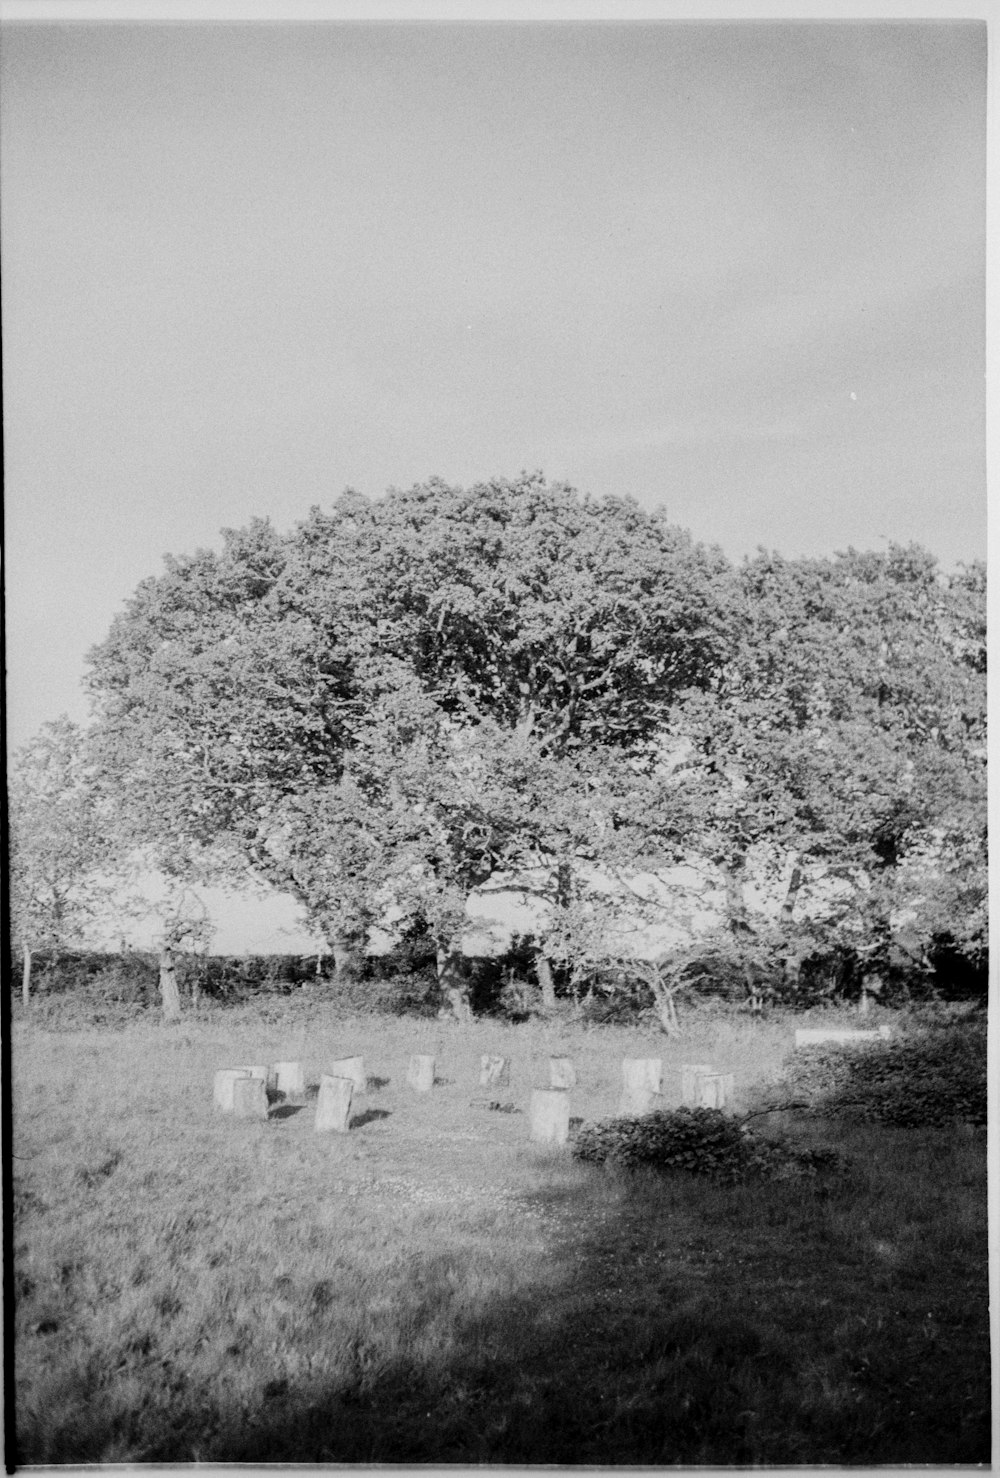 a black and white photo of a large tree